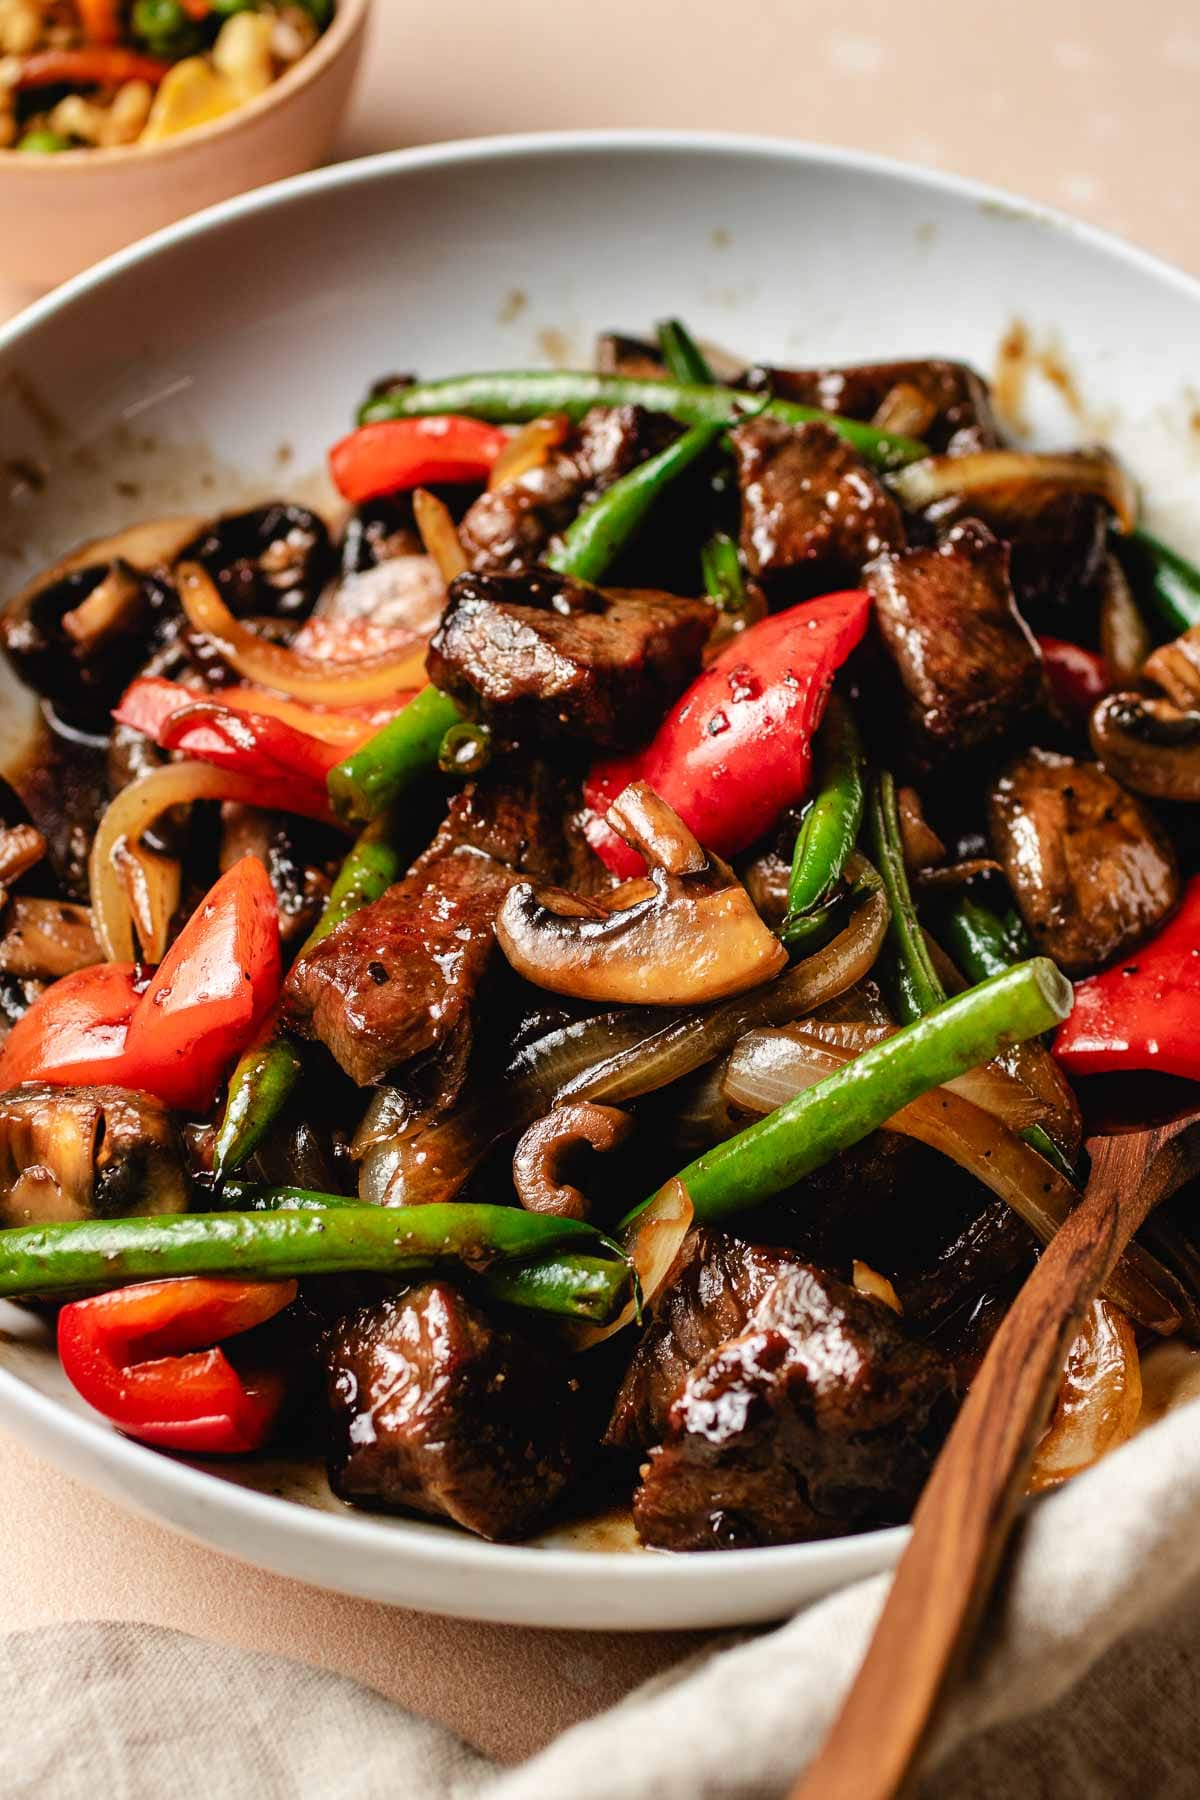 A side shot shows Panda Express black pepper angus steak dish with tender beef cubes and crispy veggies made gluten-free in a white serving plate.